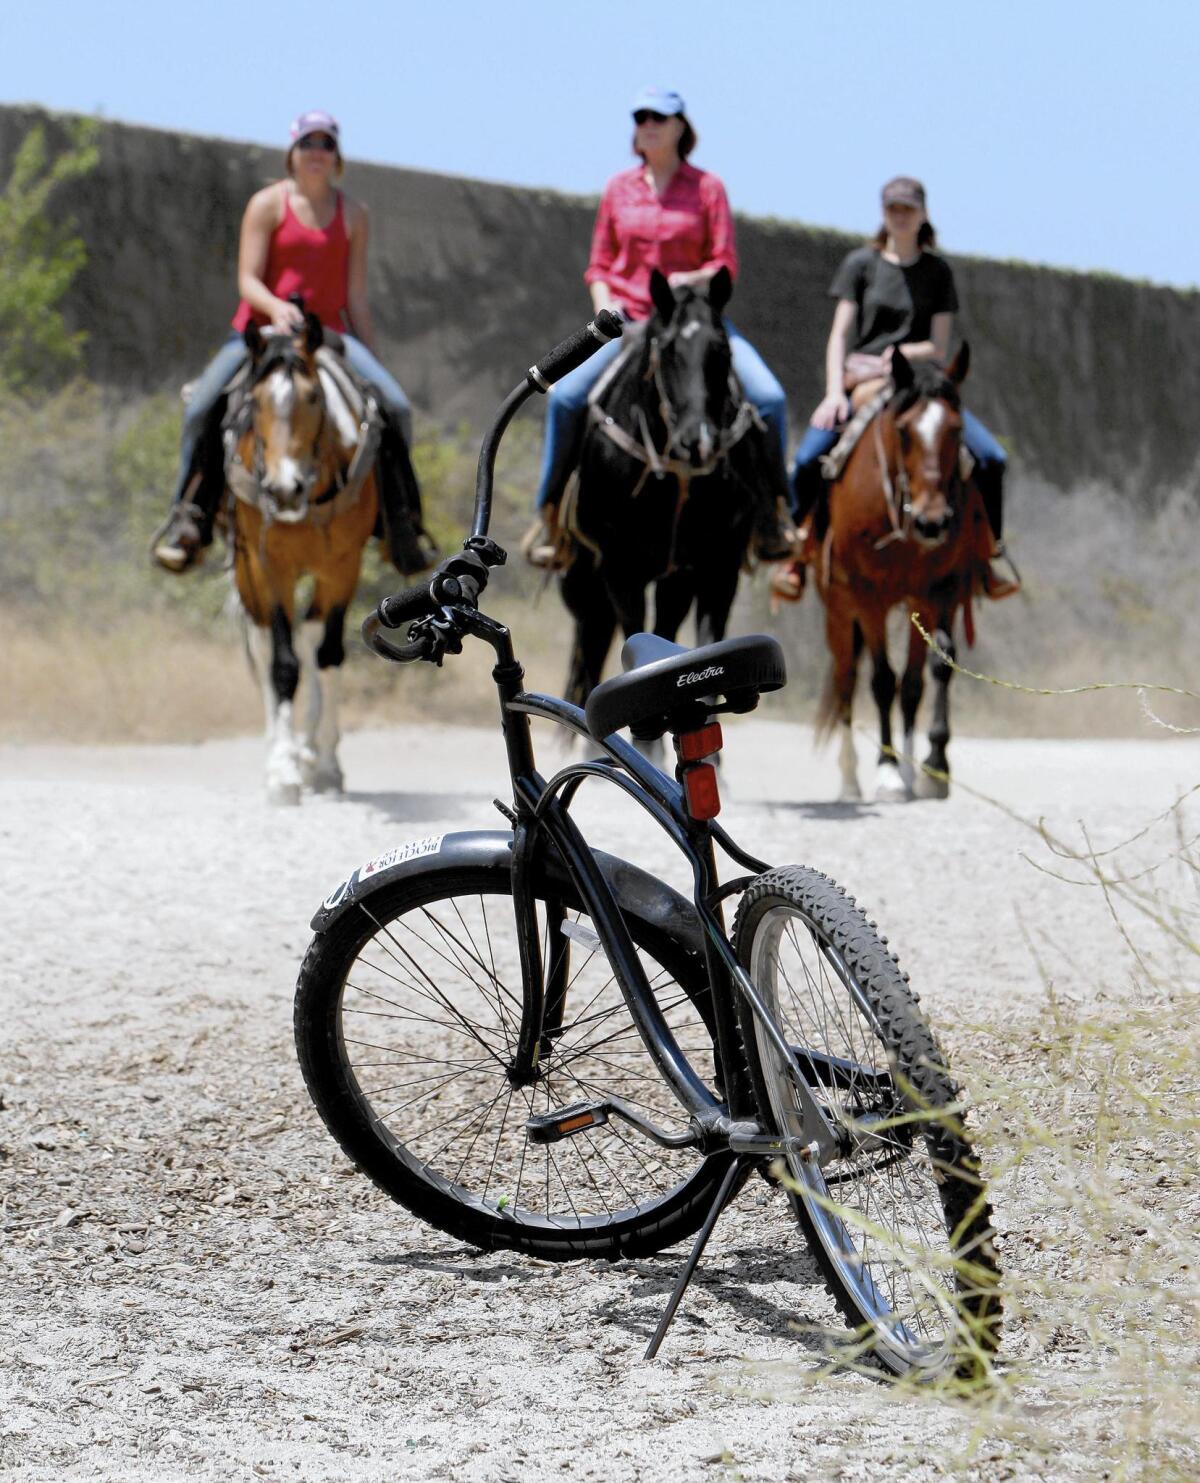 With a bicycle parked nearby, Rocken P Stables horseback riding guide Alyssa Conklin, left, leads two riders towards the Mariposa Street bridge in Burbank.